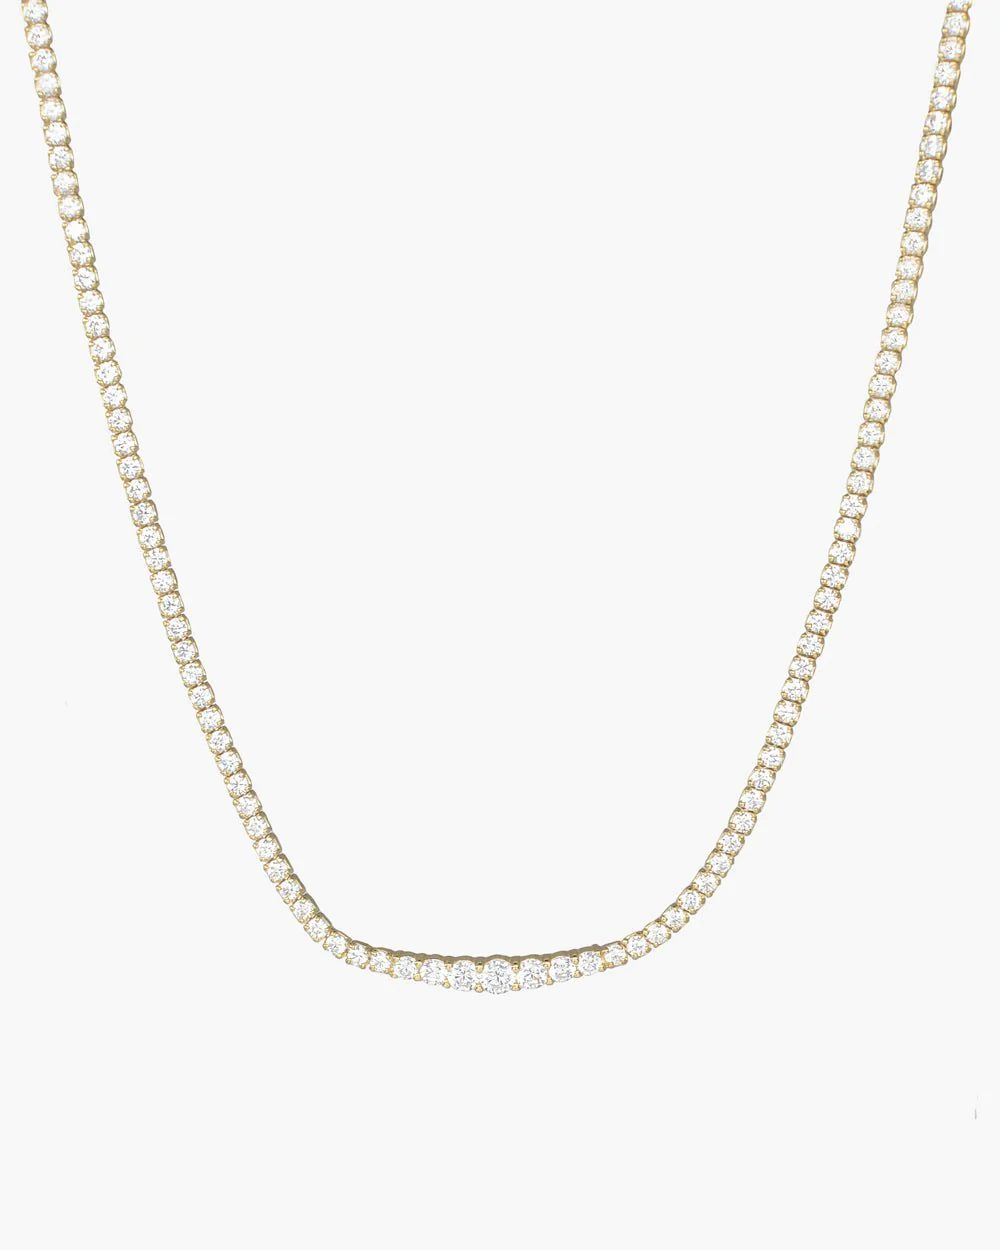 coco gradient tennis choker necklace

                      -

                      $94.40

    ... | Cupcakes and Cashmere